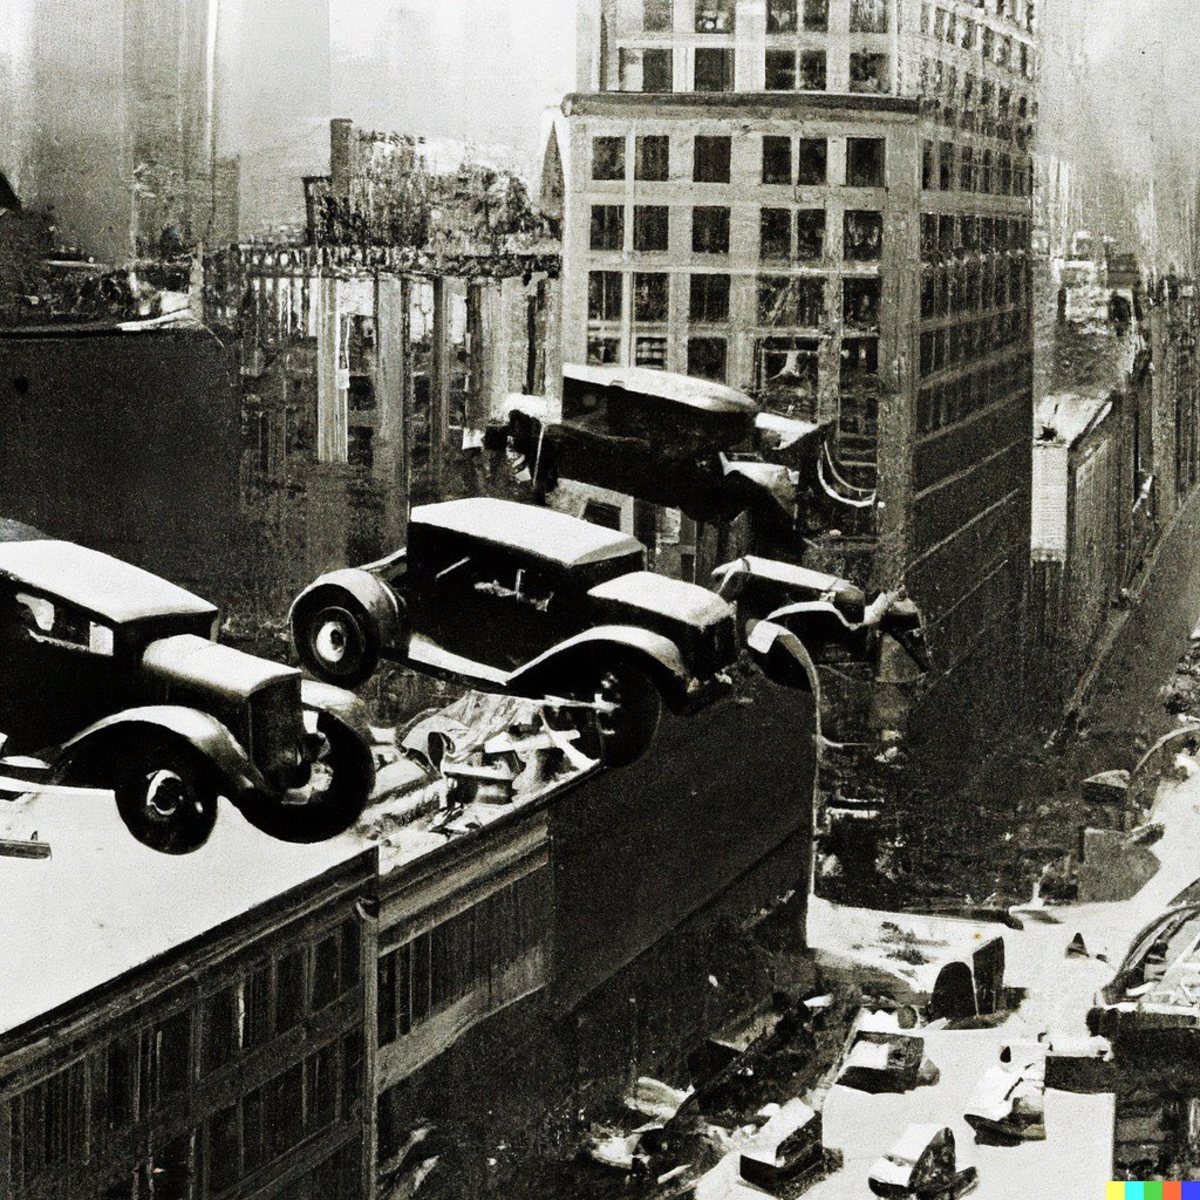 A highly detailed, vintage, grainy photo of flying cars in New York City (1936) - Actual text prompt used